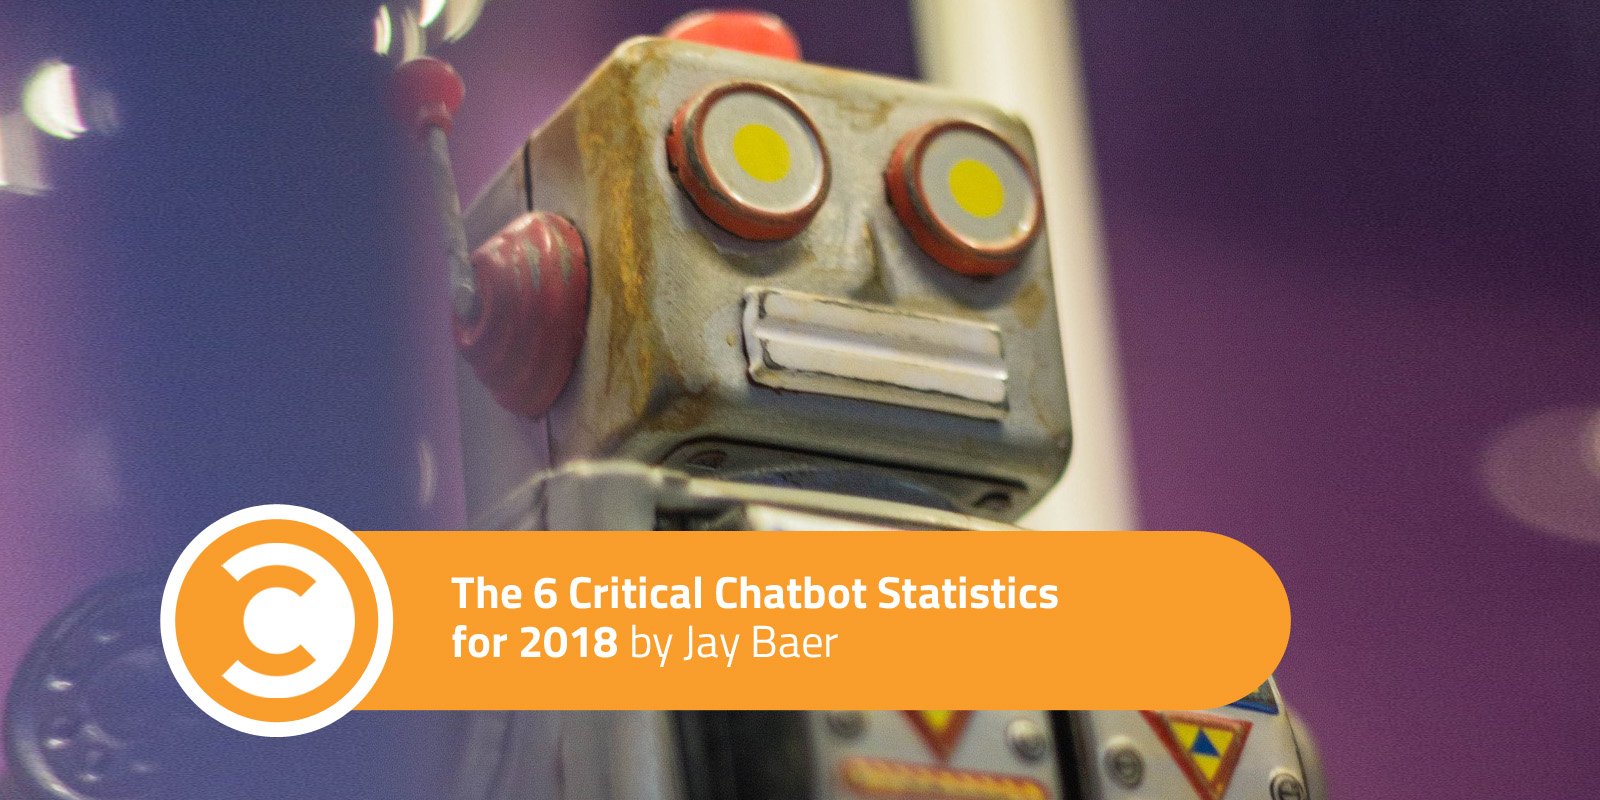 The 6 Critical Chatbot Statistics for 2018